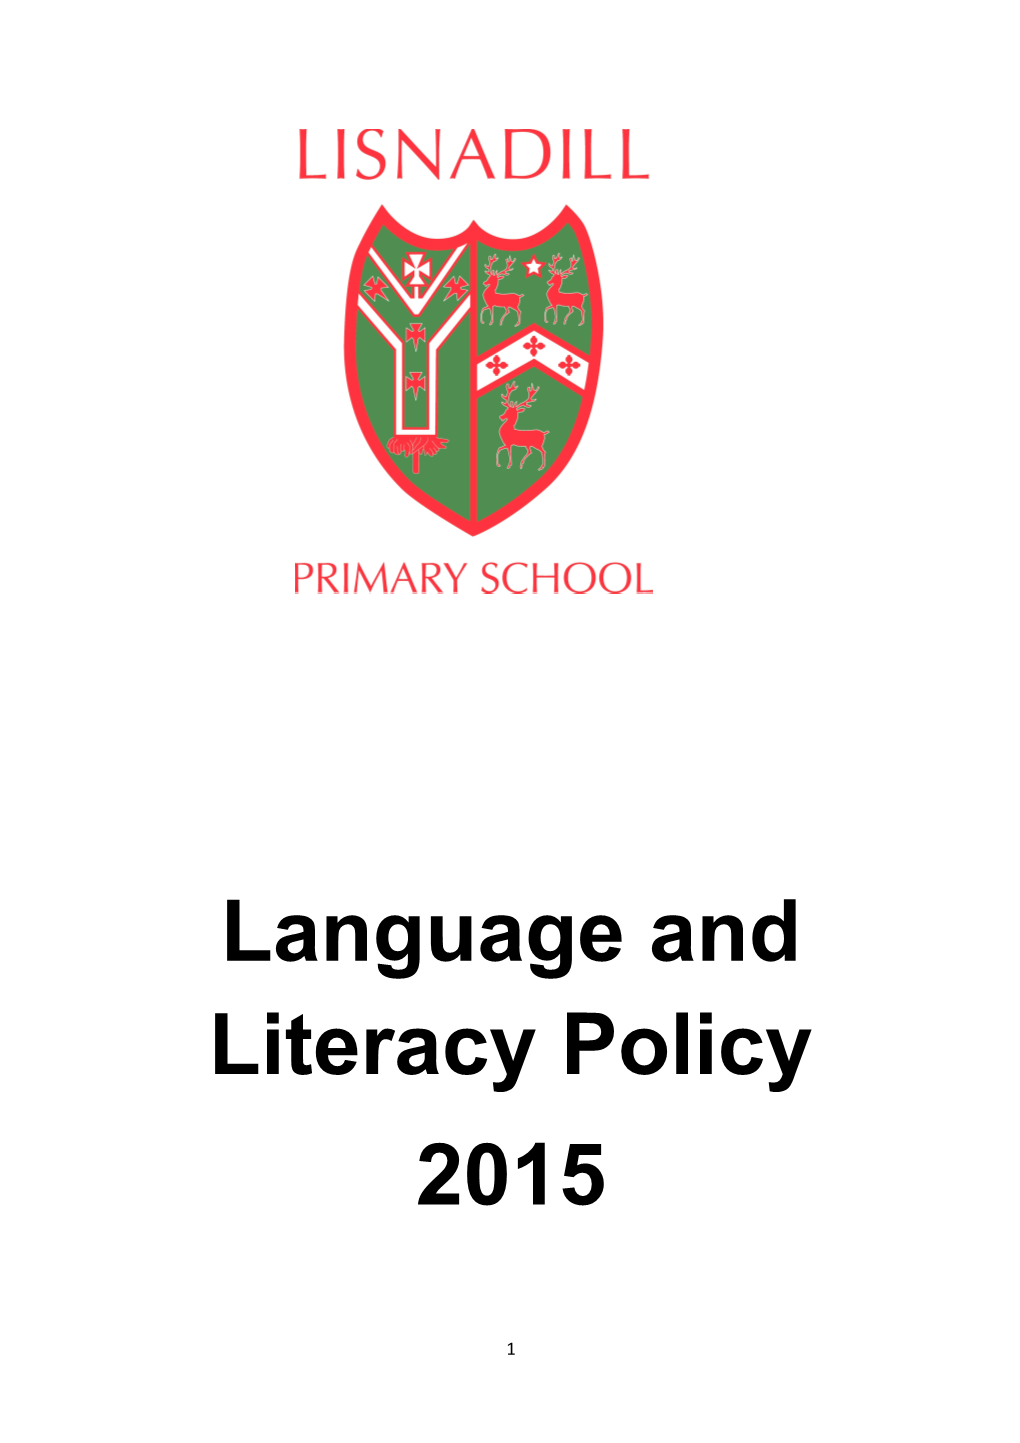 The Development of a Language/Literacy Policy in the Primary School